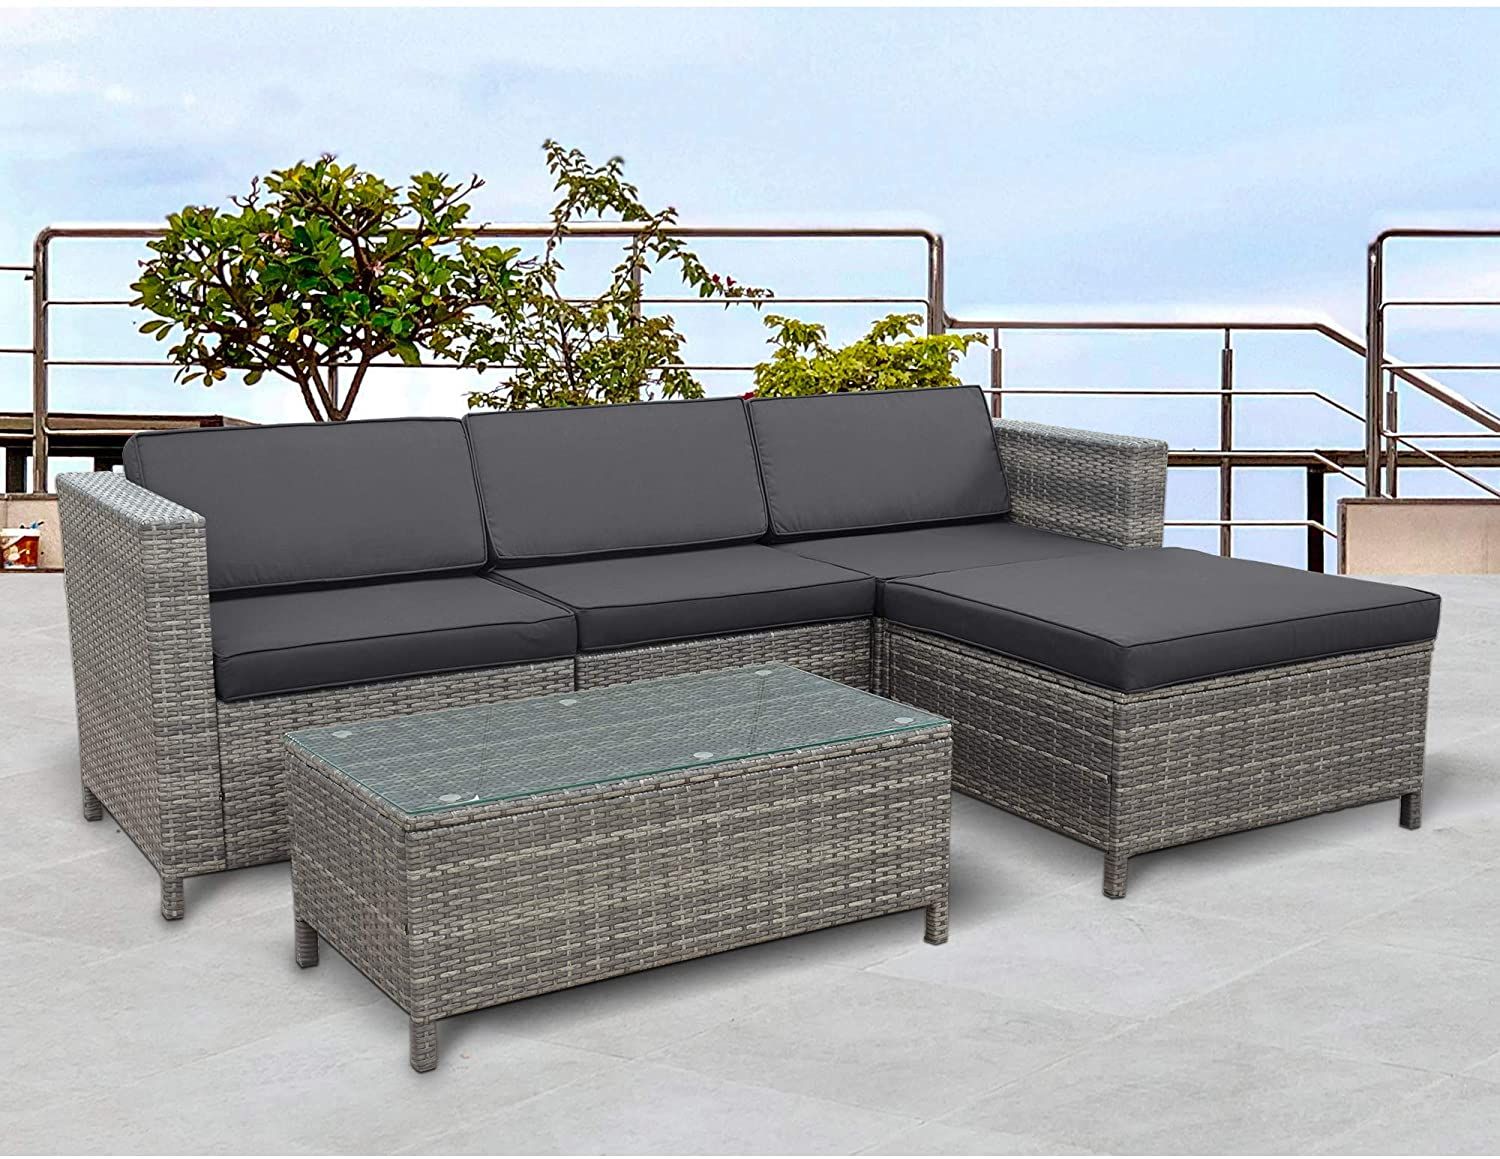 5 Piece Outdoor Patio Furniture Set, All Weather Wicker Rattan Regarding Outdoor Wicker Sectional Sofa Sets (View 2 of 15)